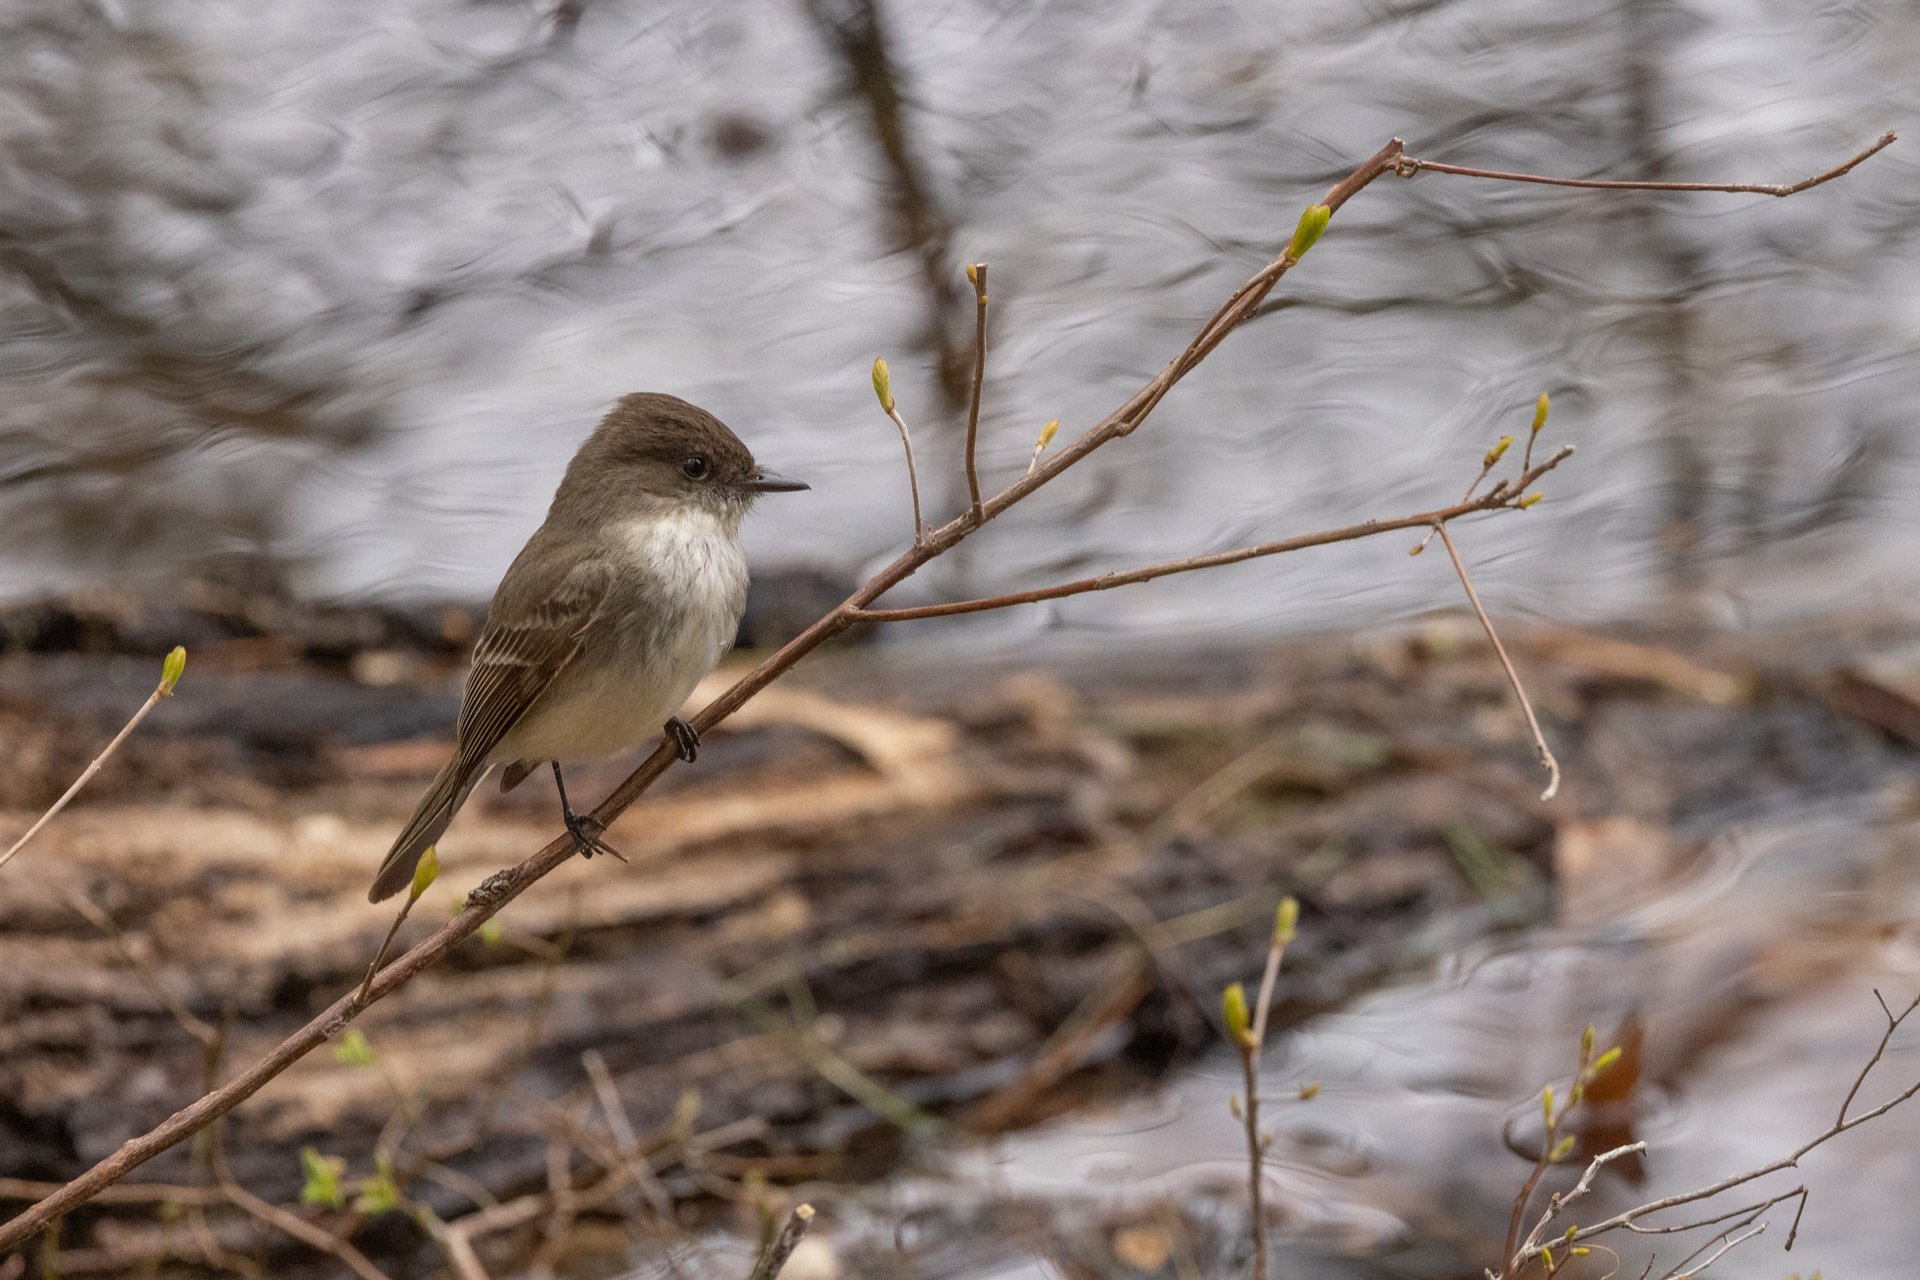 Eastern Phoebe perched on twig